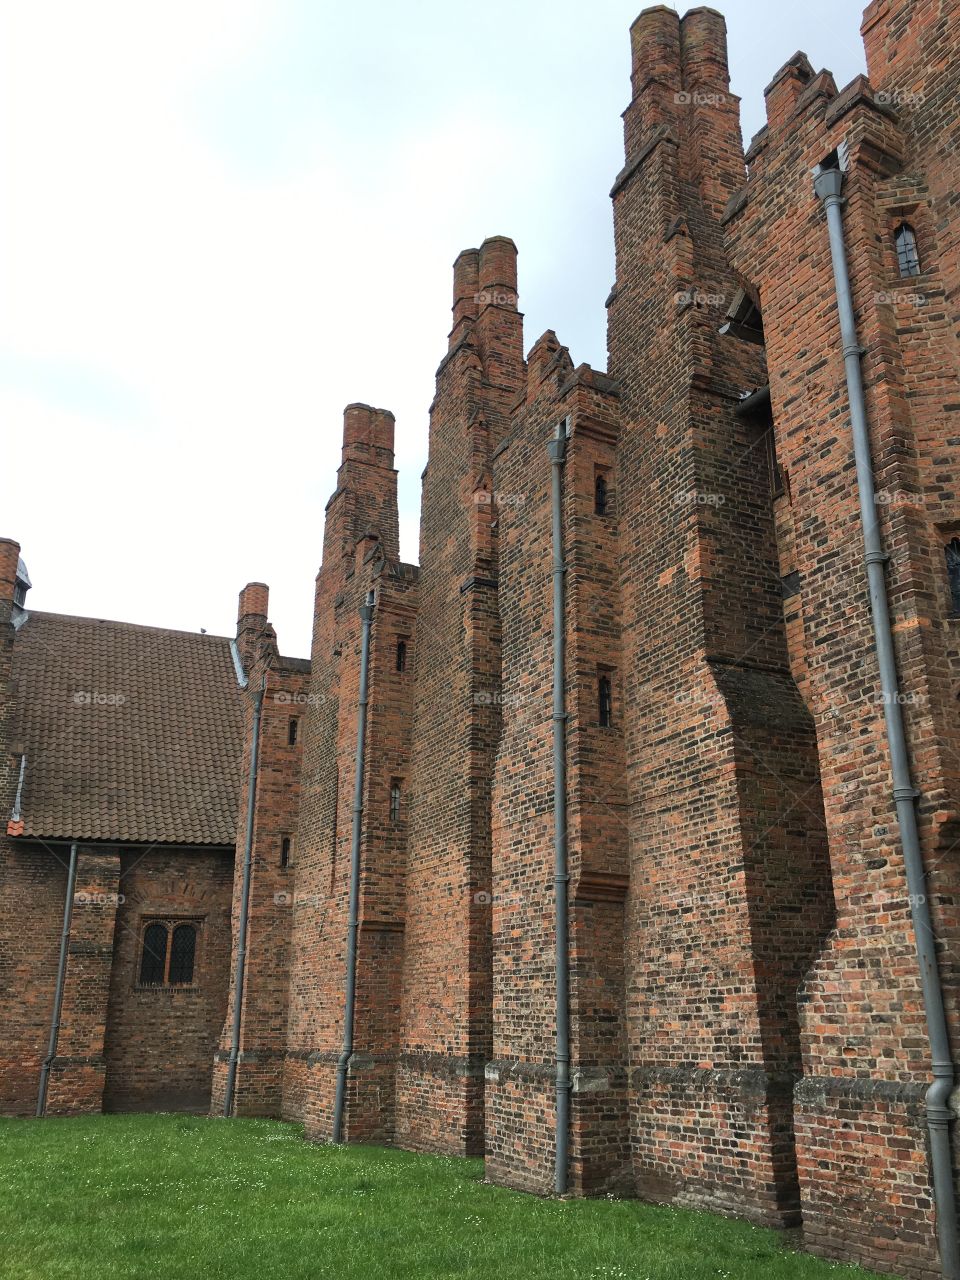 Exterior view of the intricate brickwork chimneys at the medieval Manor House at Gainsborough Old Hall